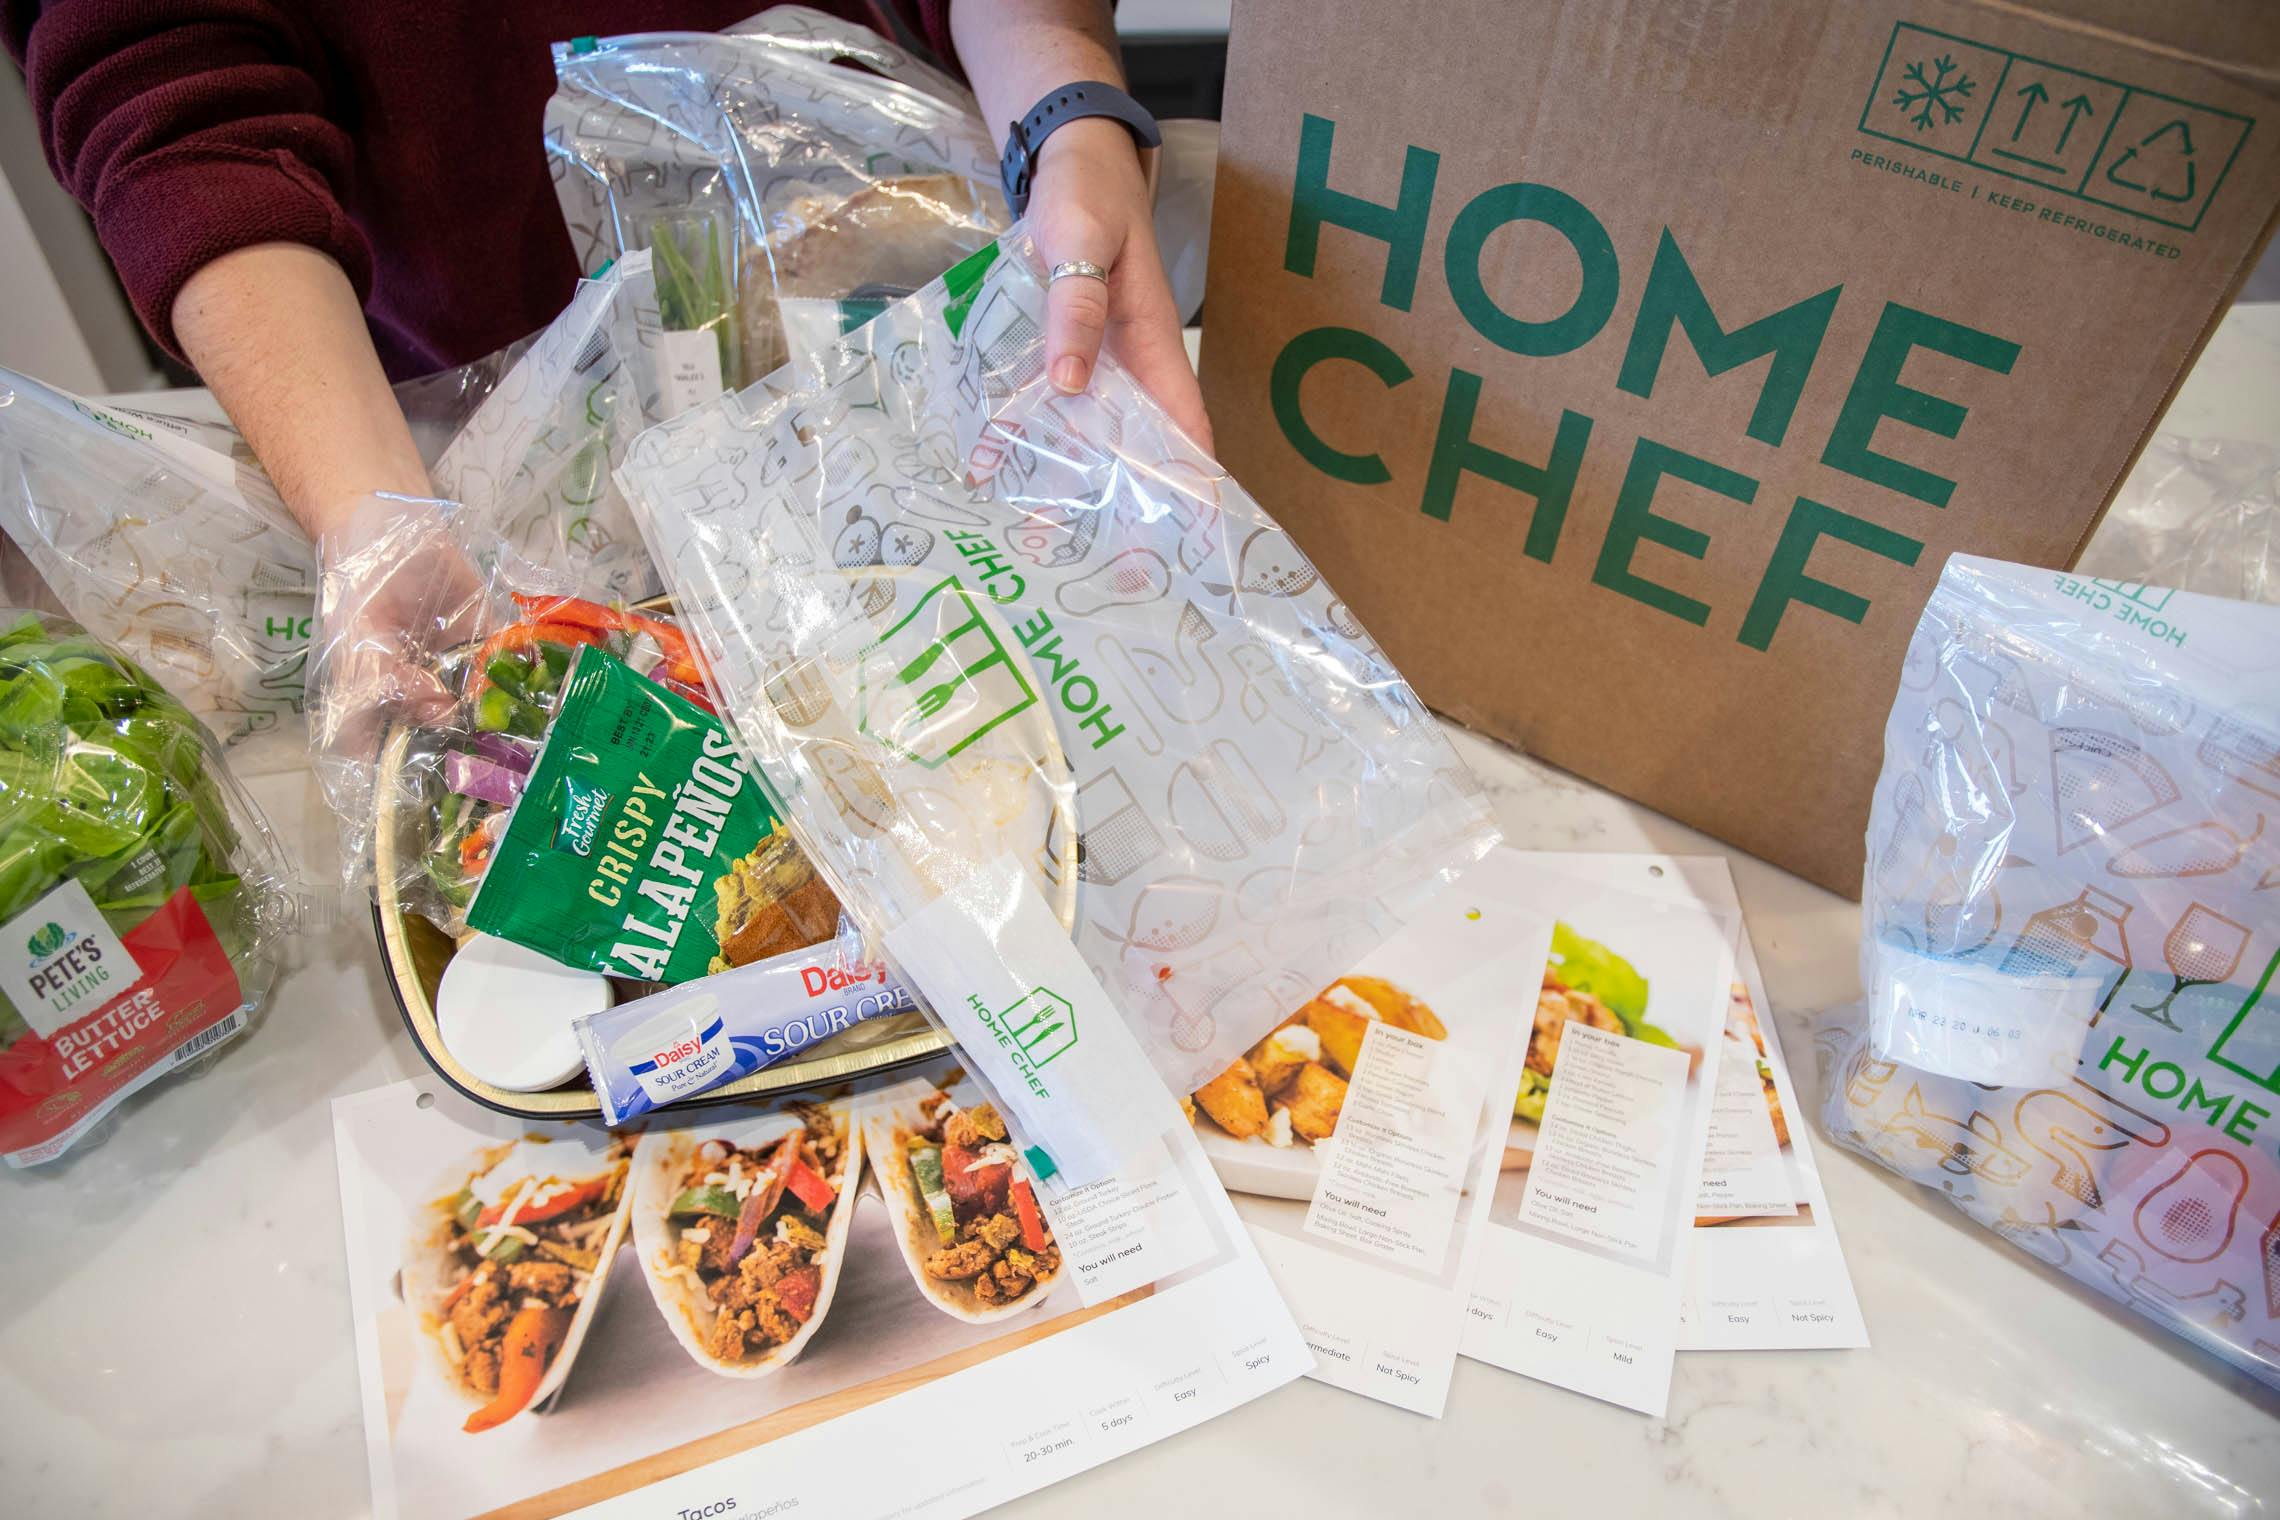 Our Honest Meal Kits Review: The Cheap, The Flavorful and The Mushy